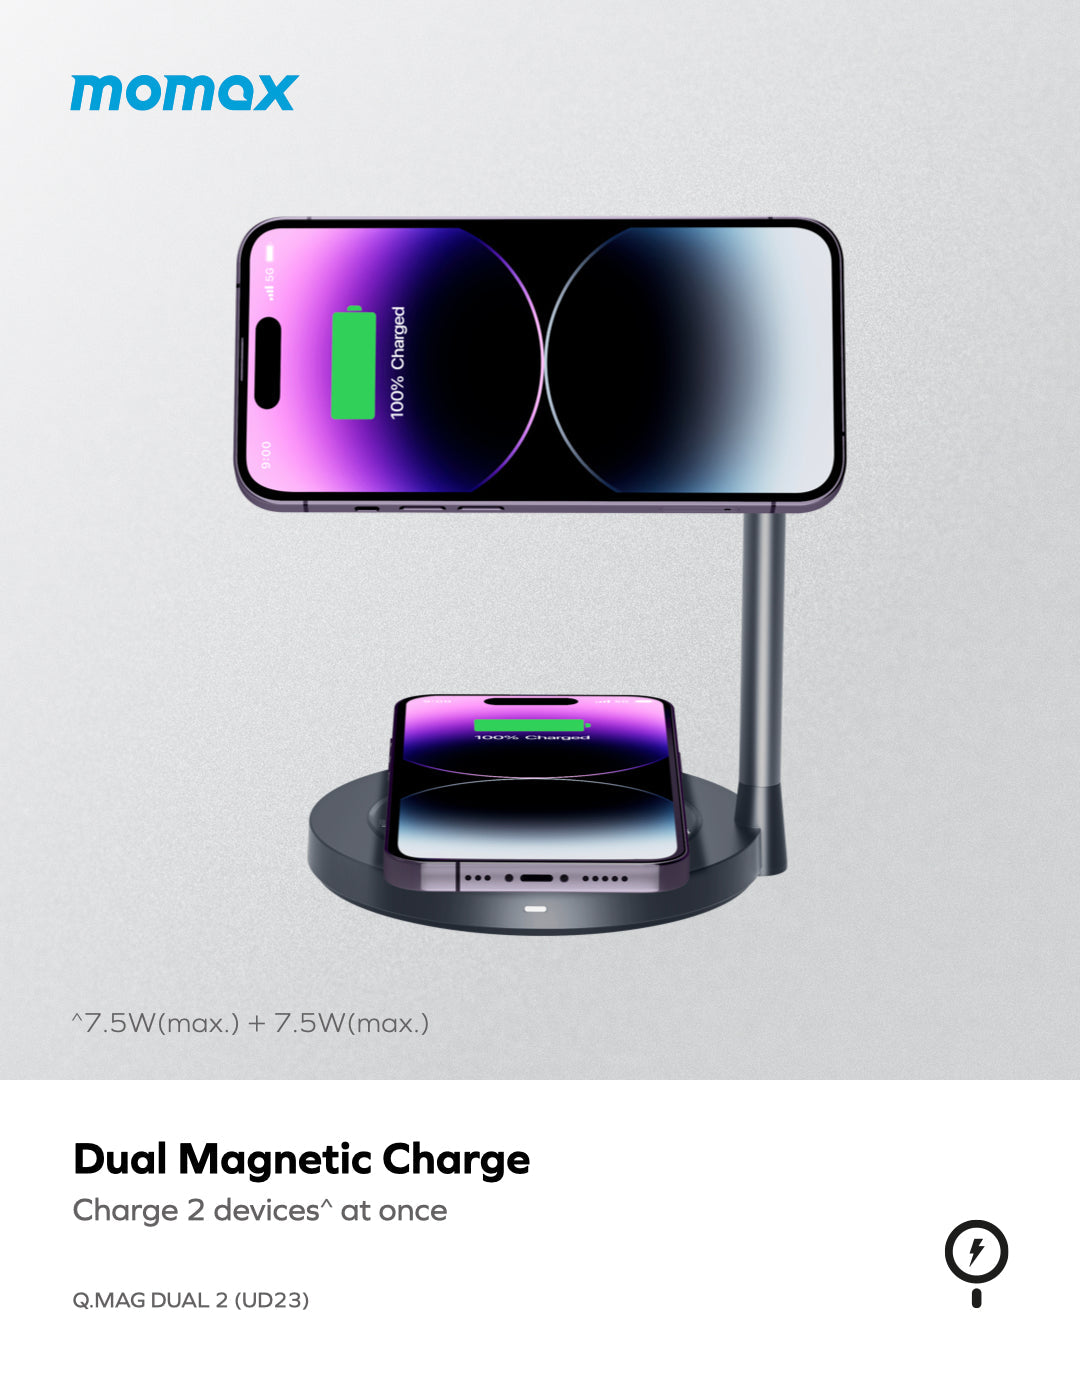 Q.Mag Dual2 | Dual Magnetic Wireless Charging Stand (15W)